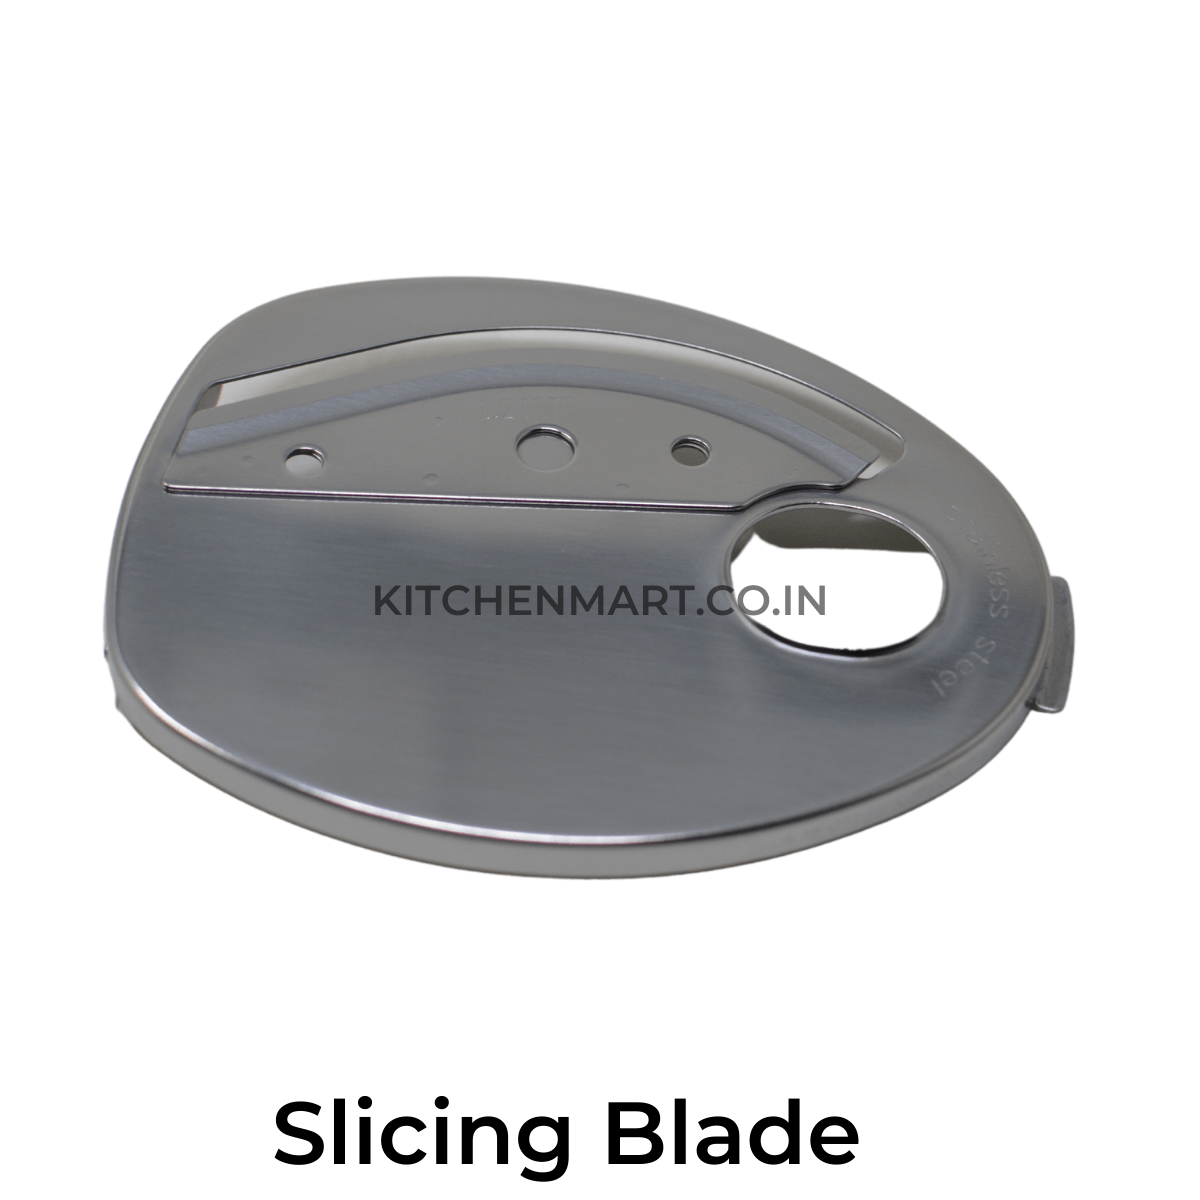 Slicing Blade attachment suitable for Preethi Zodiac Mixer Grinder (2.4 mm thickness) - KITCHEN MART